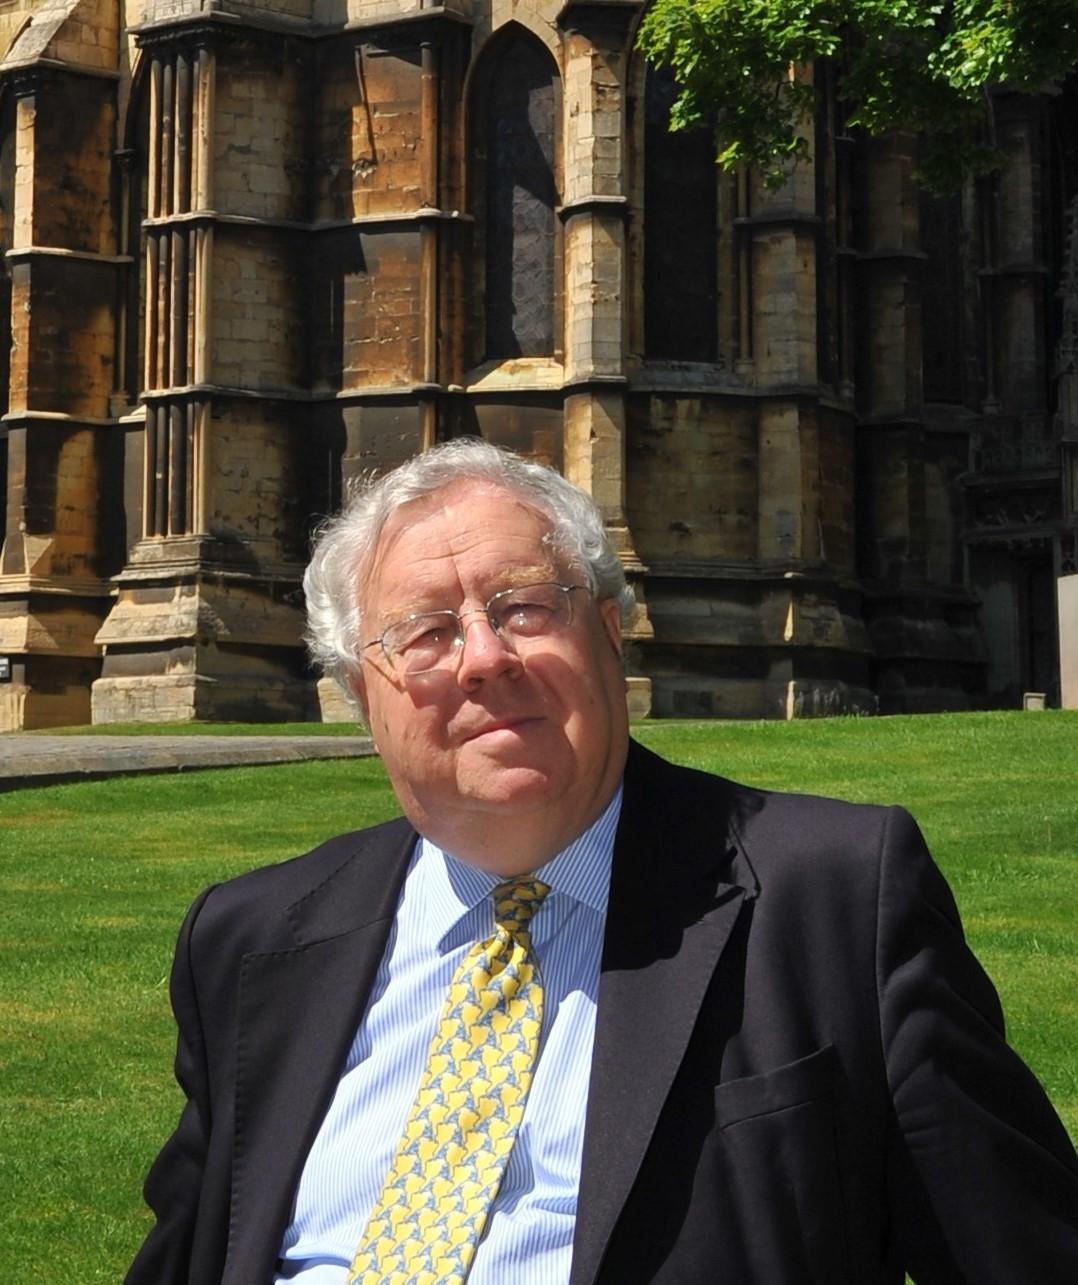 Lord Cormack, pictured in front of a historic building